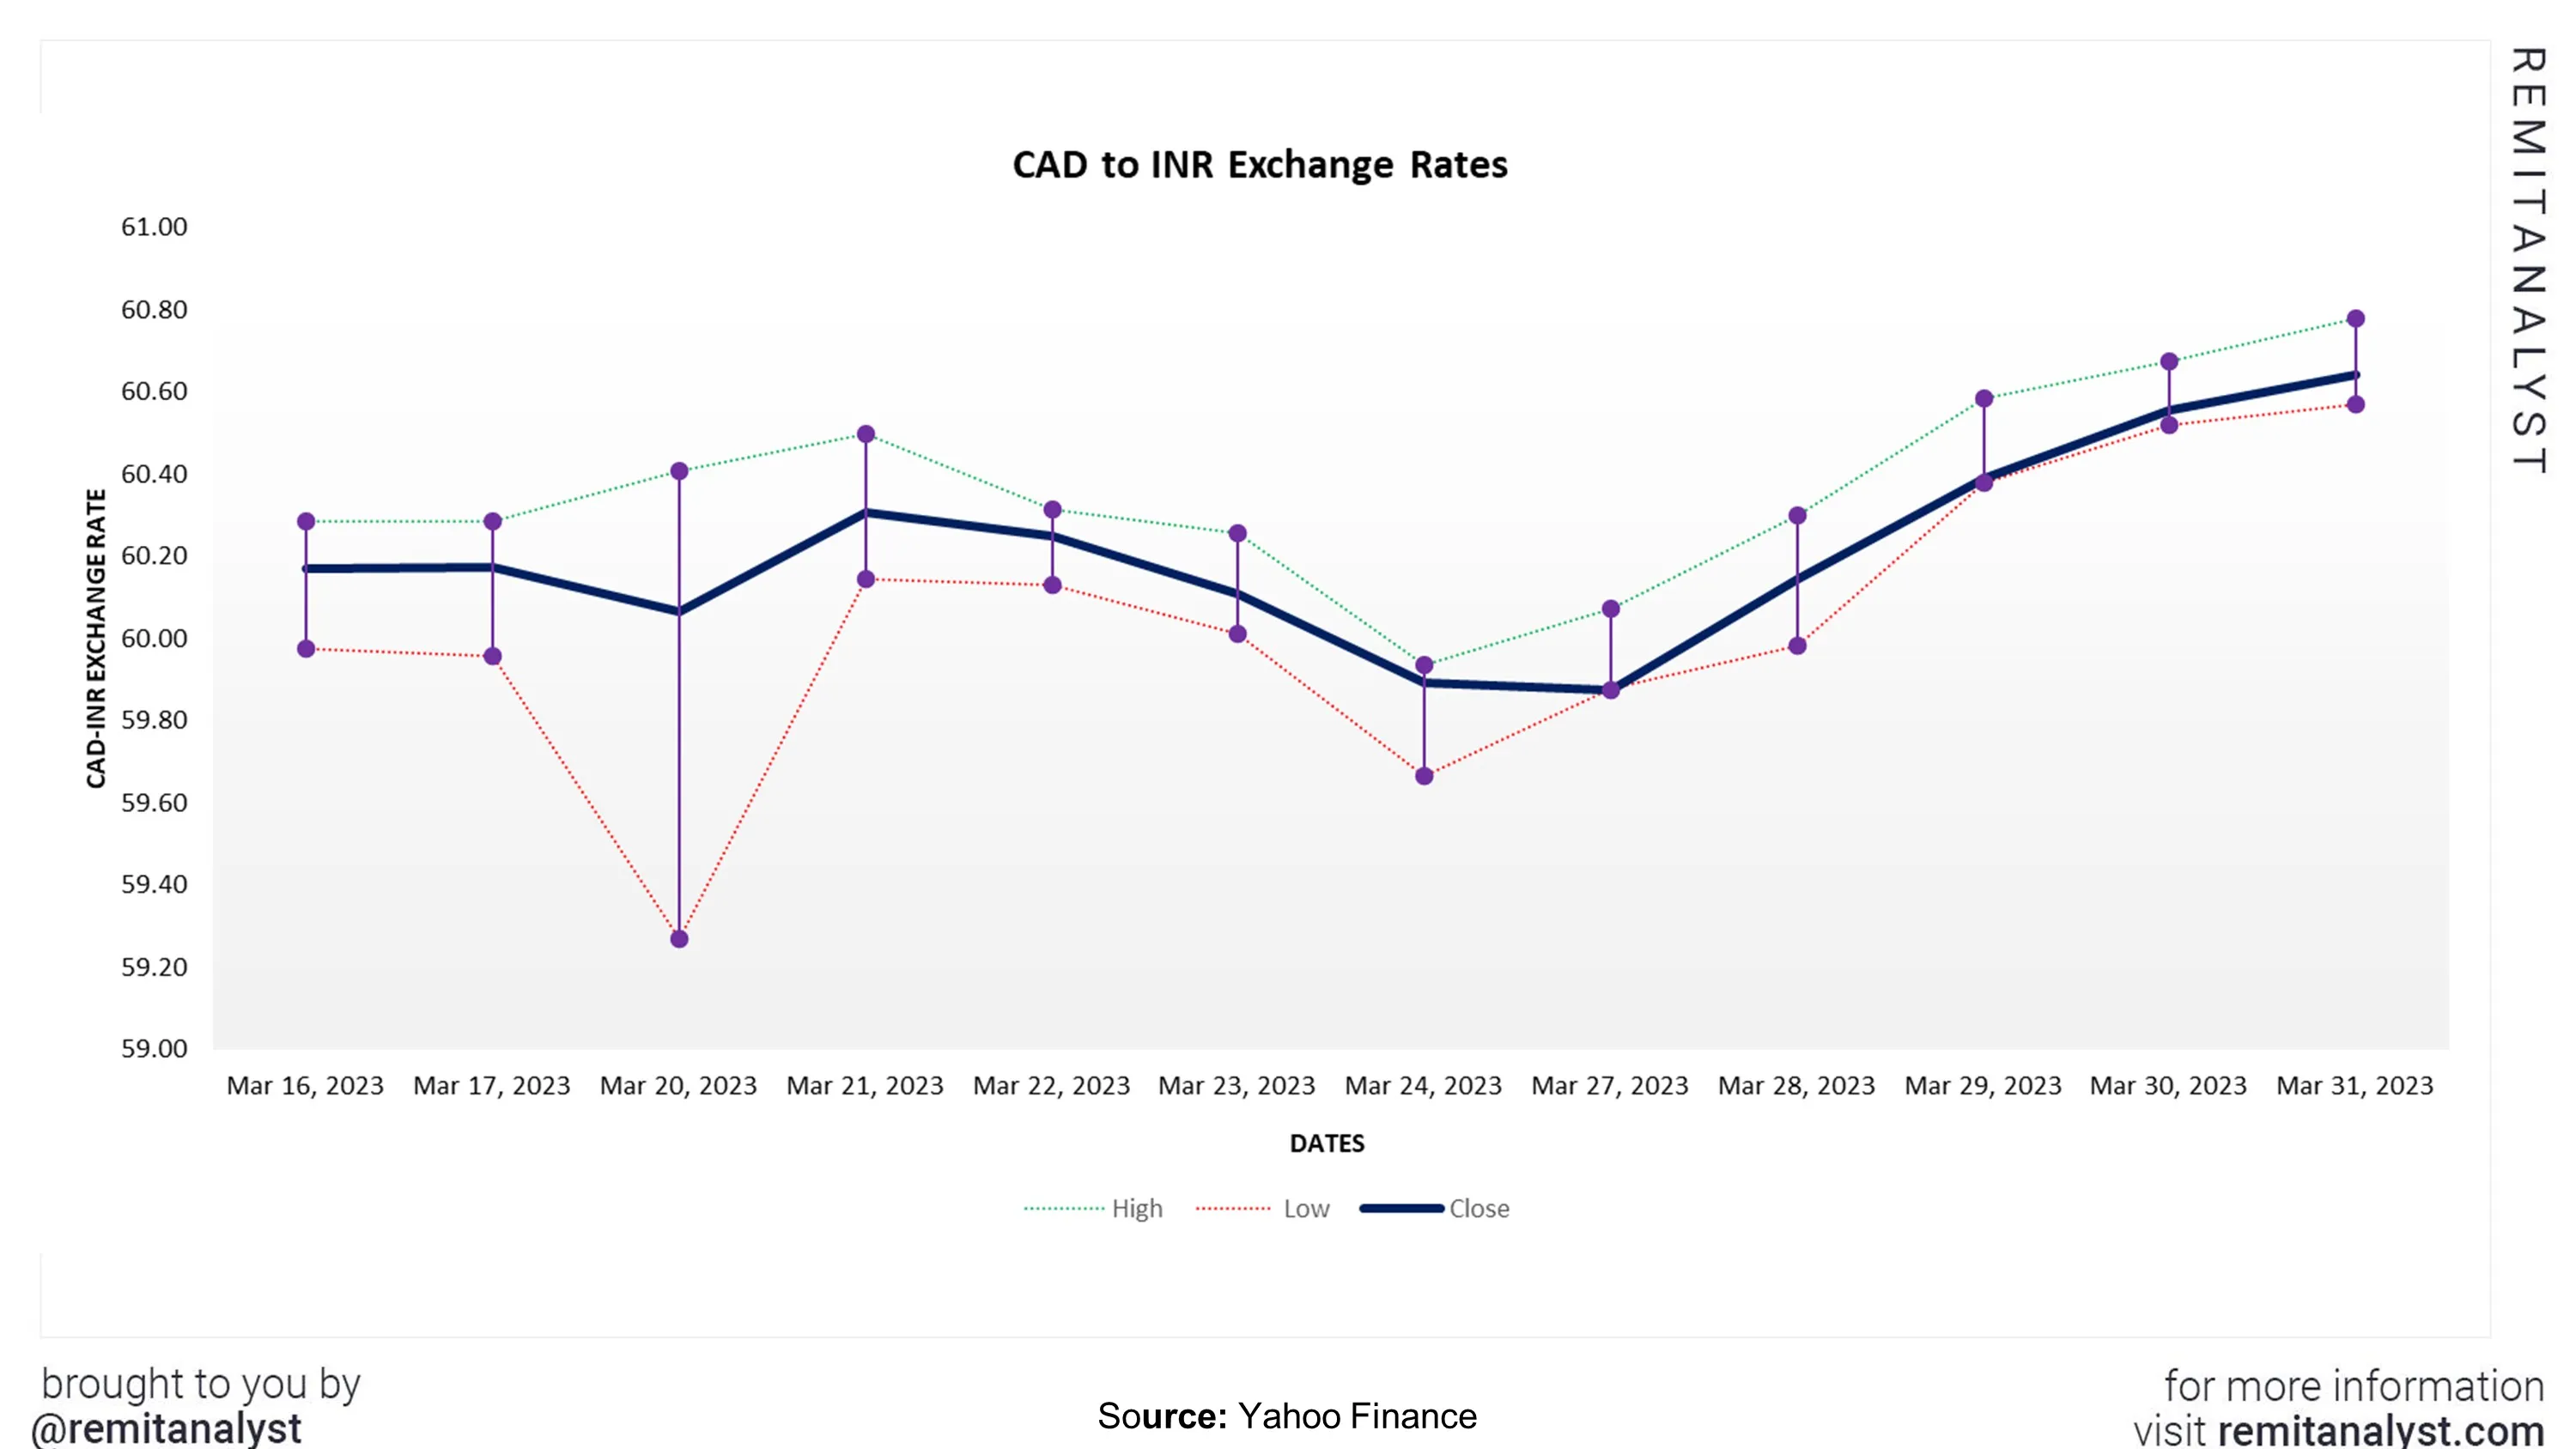 cad-to-inr-exchange-rate-from-16-mar-2023-to-31-mar-2023